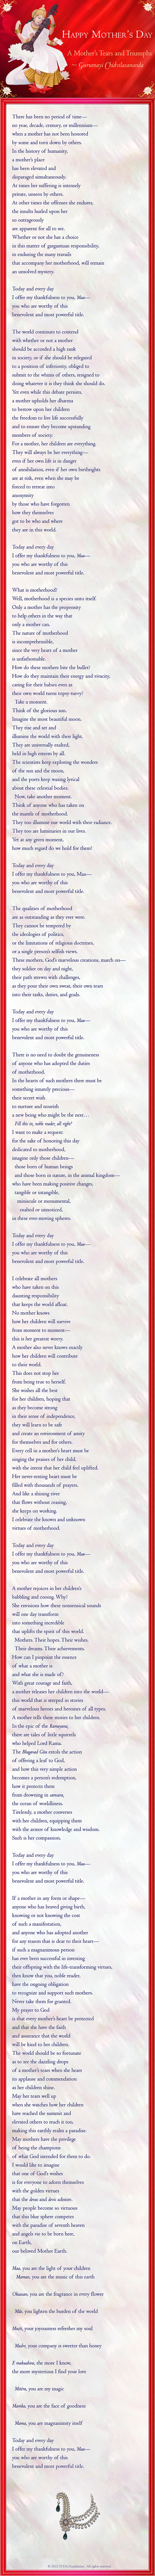 Poem by Gurumayi - A Mother's Tears and Triumphs